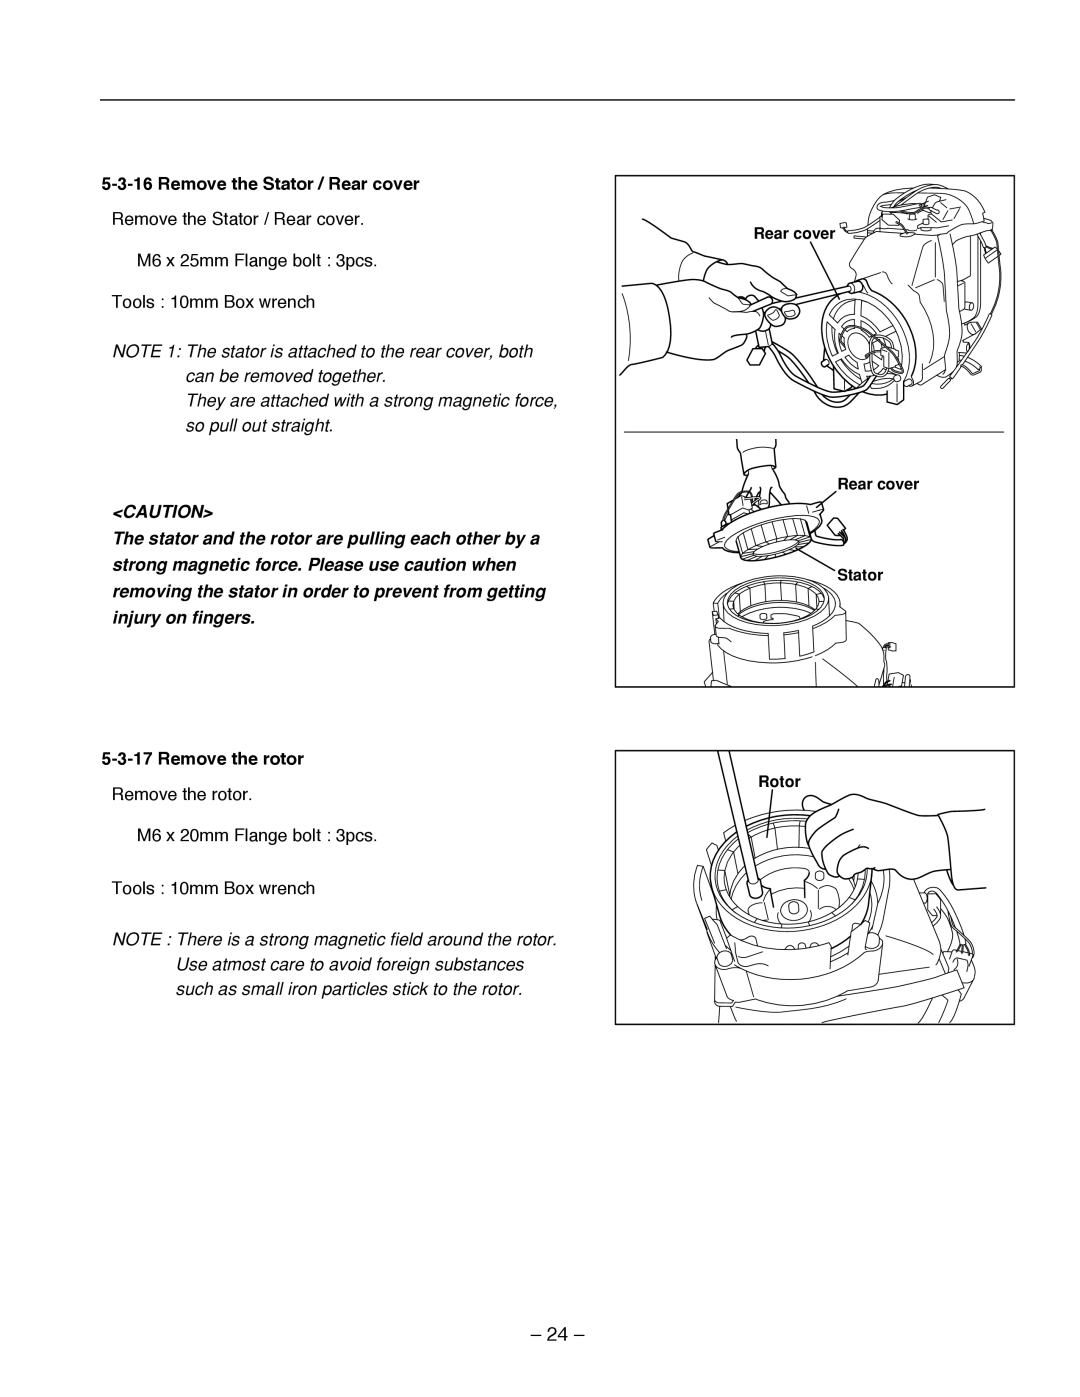 Subaru Robin Power Products R1700i service manual 5-3-16Remove the Stator / Rear cover, 5-3-17Remove the rotor 